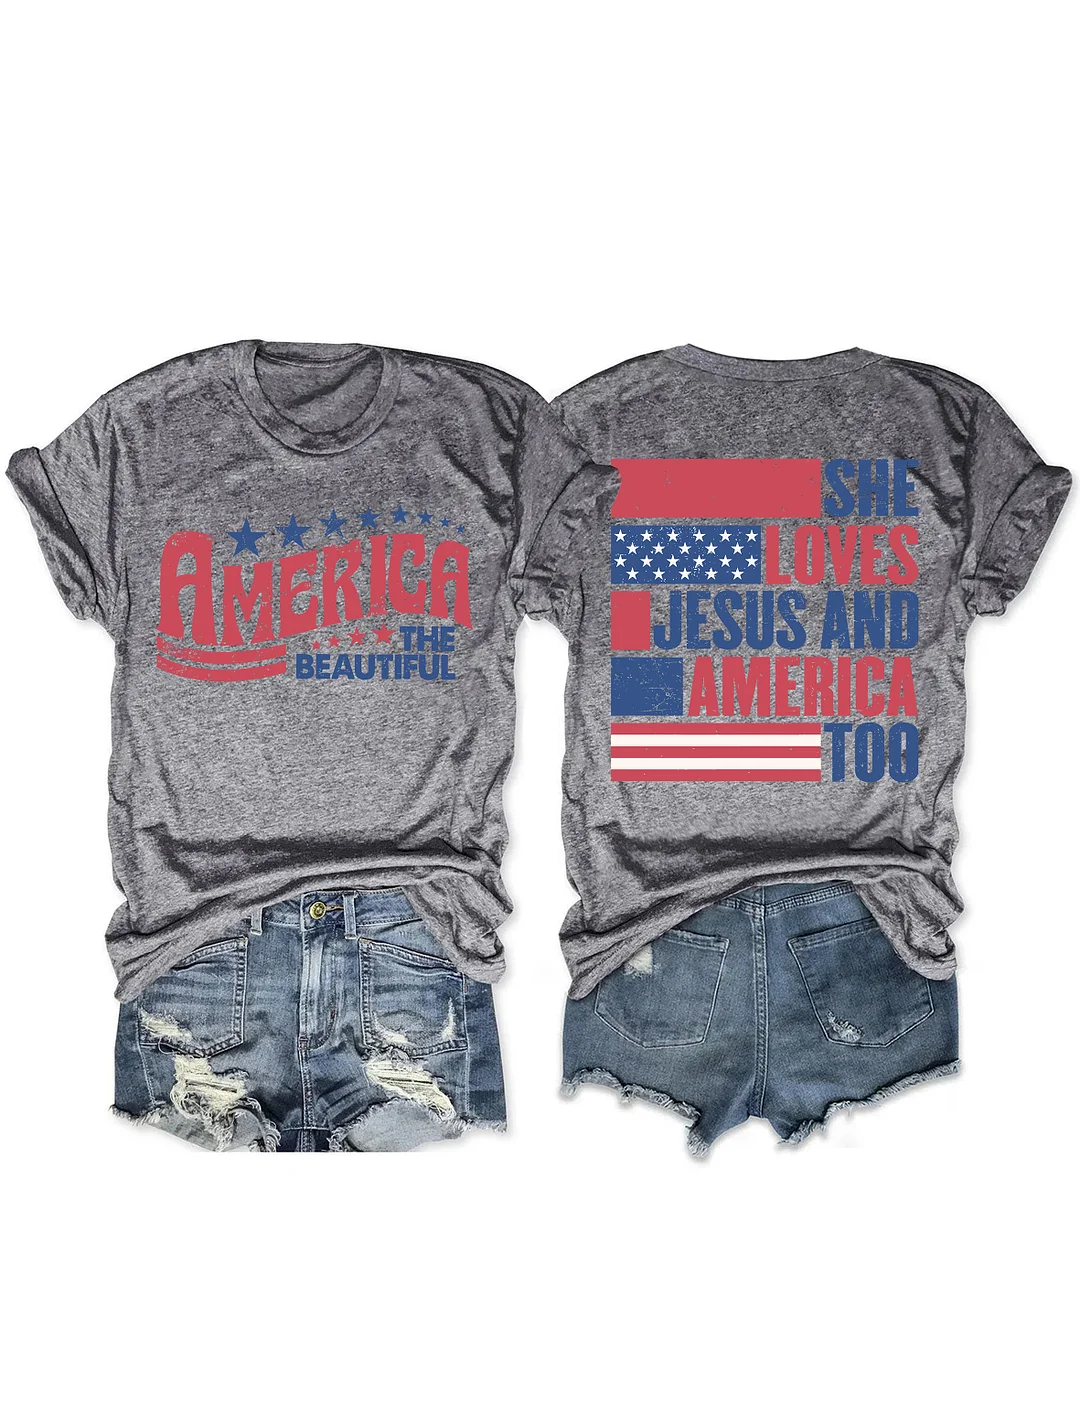 She Loves Jesus and America Too T-Shirt